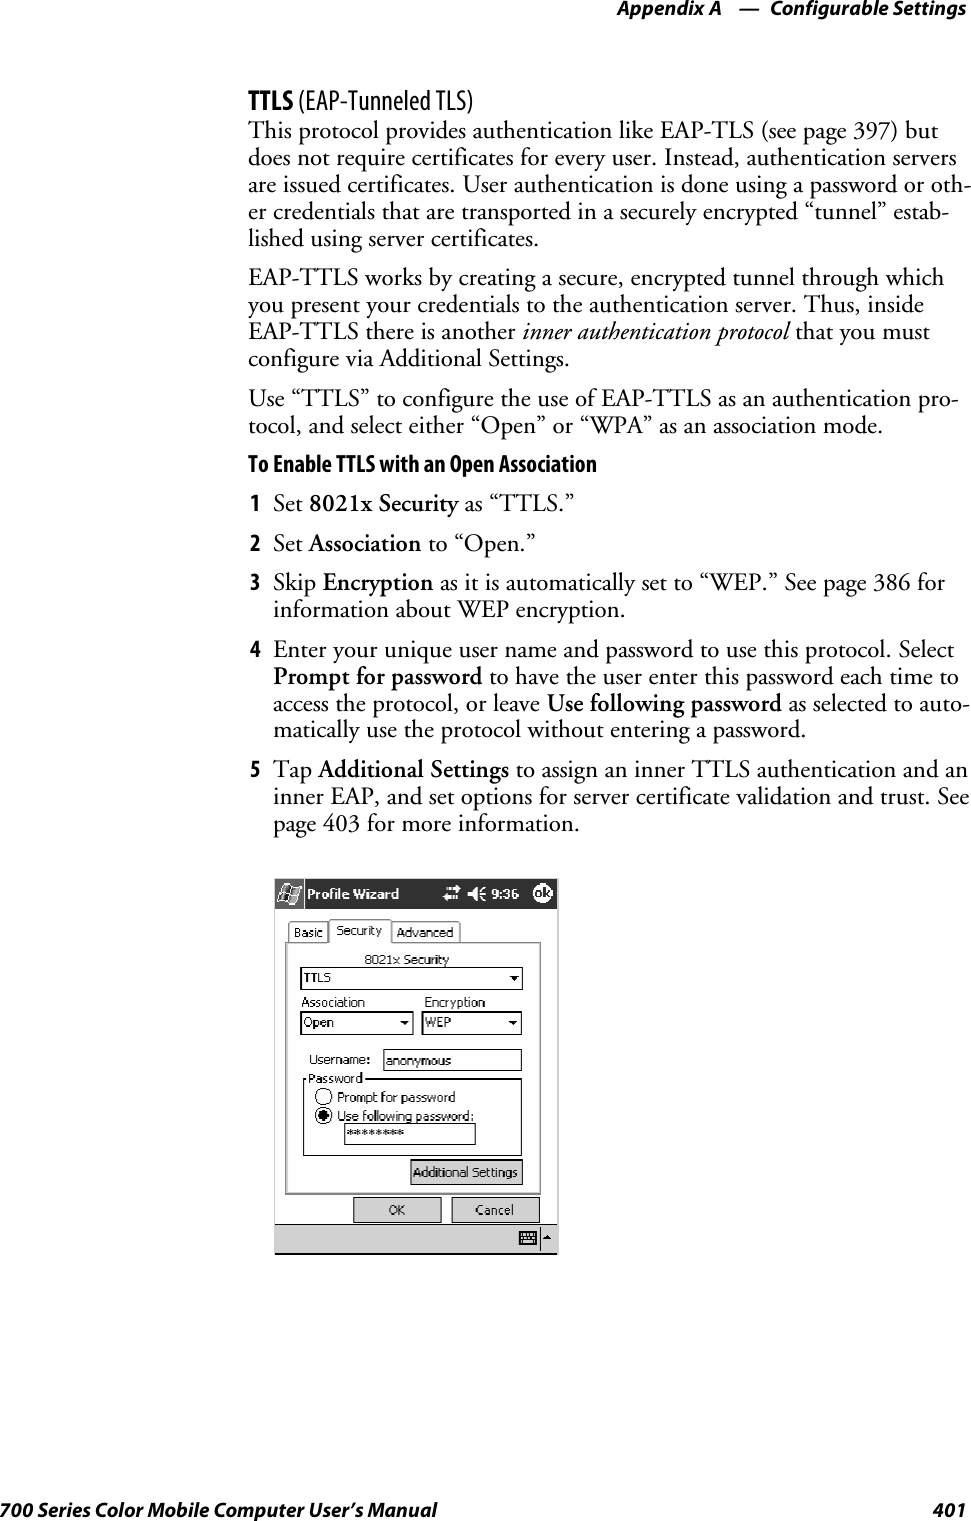 Configurable SettingsAppendix —A401700 Series Color Mobile Computer User’s ManualTTLS (EAP-Tunneled TLS)This protocol provides authentication like EAP-TLS (see page 397) butdoes not require certificates for every user. Instead, authentication serversare issued certificates. User authentication is done using a password or oth-er credentials that are transported in a securely encrypted “tunnel” estab-lished using server certificates.EAP-TTLS works by creating a secure, encrypted tunnel through whichyou present your credentials to the authentication server. Thus, insideEAP-TTLS there is another inner authentication protocol that you mustconfigure via Additional Settings.Use “TTLS” to configure the use of EAP-TTLS as an authentication pro-tocol, and select either “Open” or “WPA” as an association mode.ToEnableTTLSwithanOpenAssociation1Set 8021x Security as “TTLS.”2Set Association to “Open.”3Skip Encryption as it is automatically set to “WEP.” See page 386 forinformation about WEP encryption.4Enter your unique user name and password to use this protocol. SelectPrompt for password to have the user enter this password each time toaccess the protocol, or leave Use following password as selected to auto-matically use the protocol without entering a password.5Tap Additional Settings to assign an inner TTLS authentication and aninner EAP, and set options for server certificate validation and trust. Seepage 403 for more information.